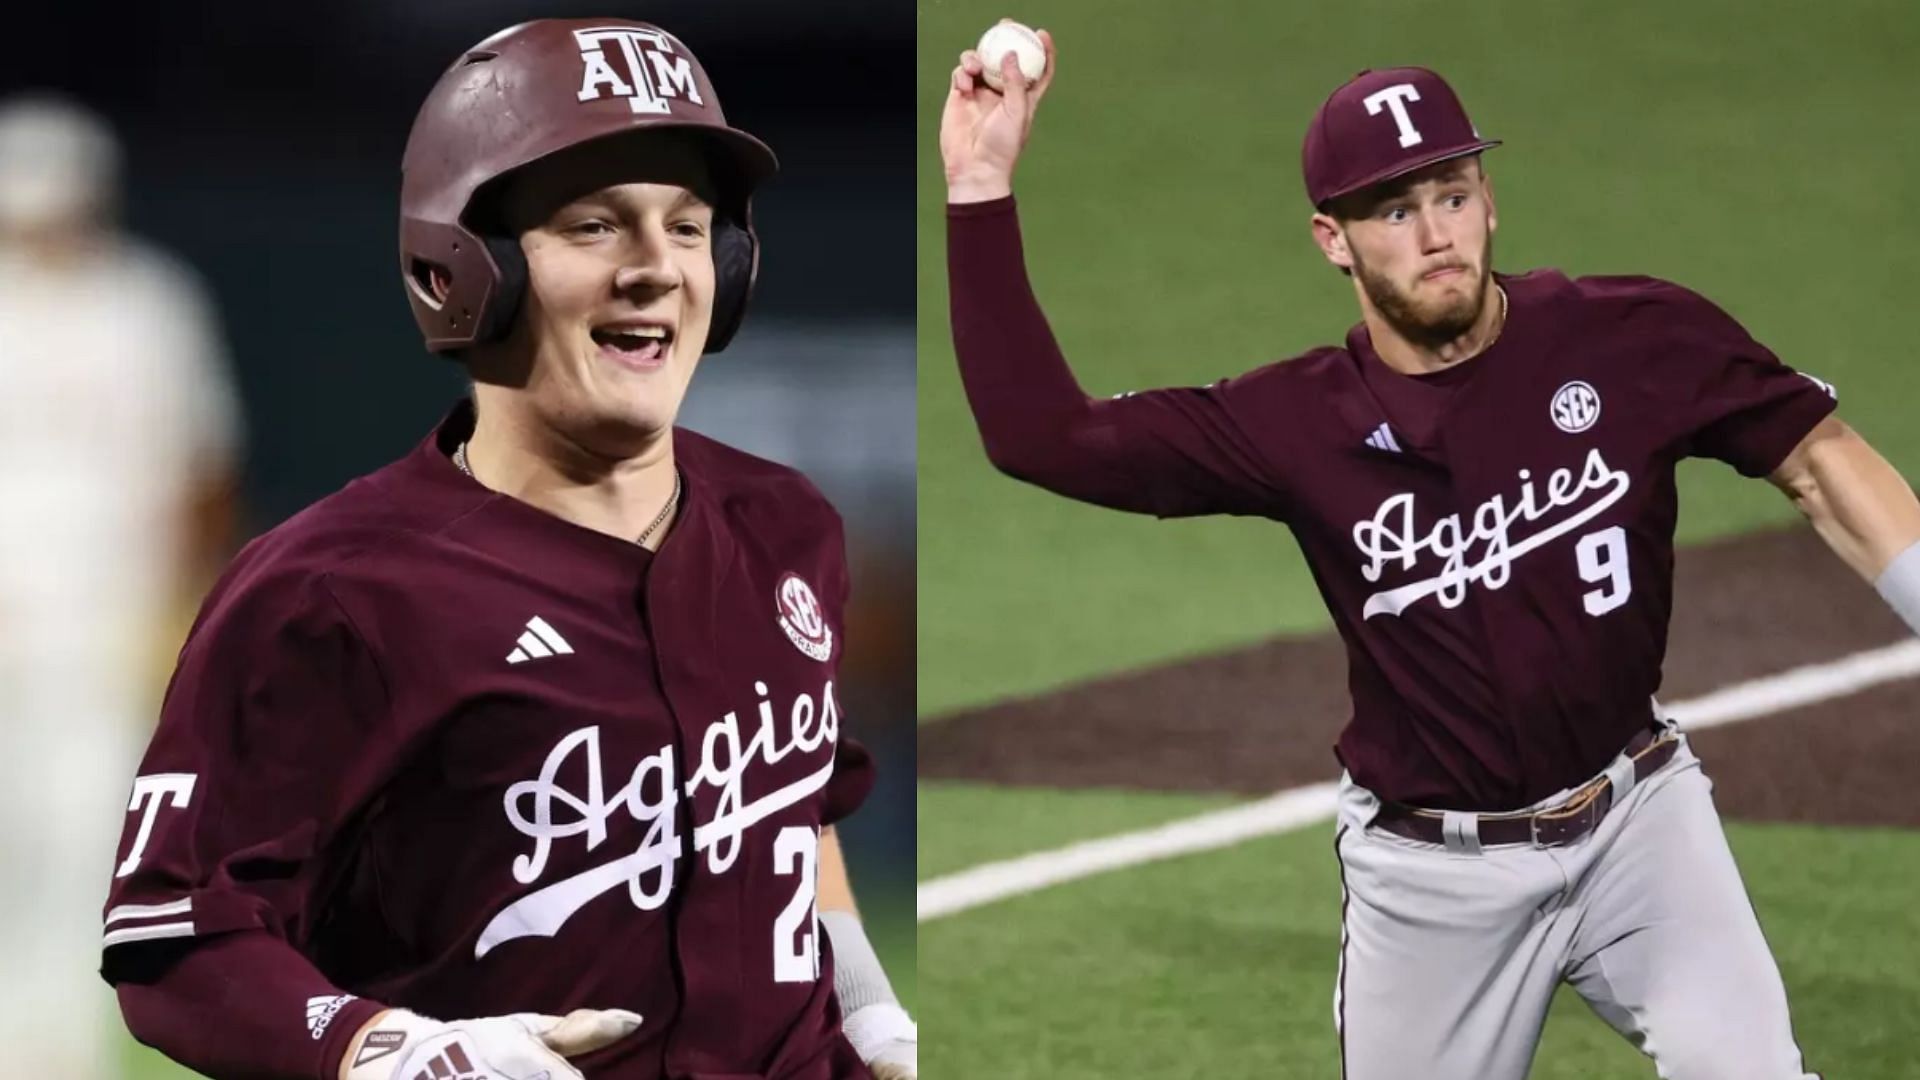 Texas A&amp;M players Jackson Appel and Gavin Grahovac have been key pieces in the Aggies